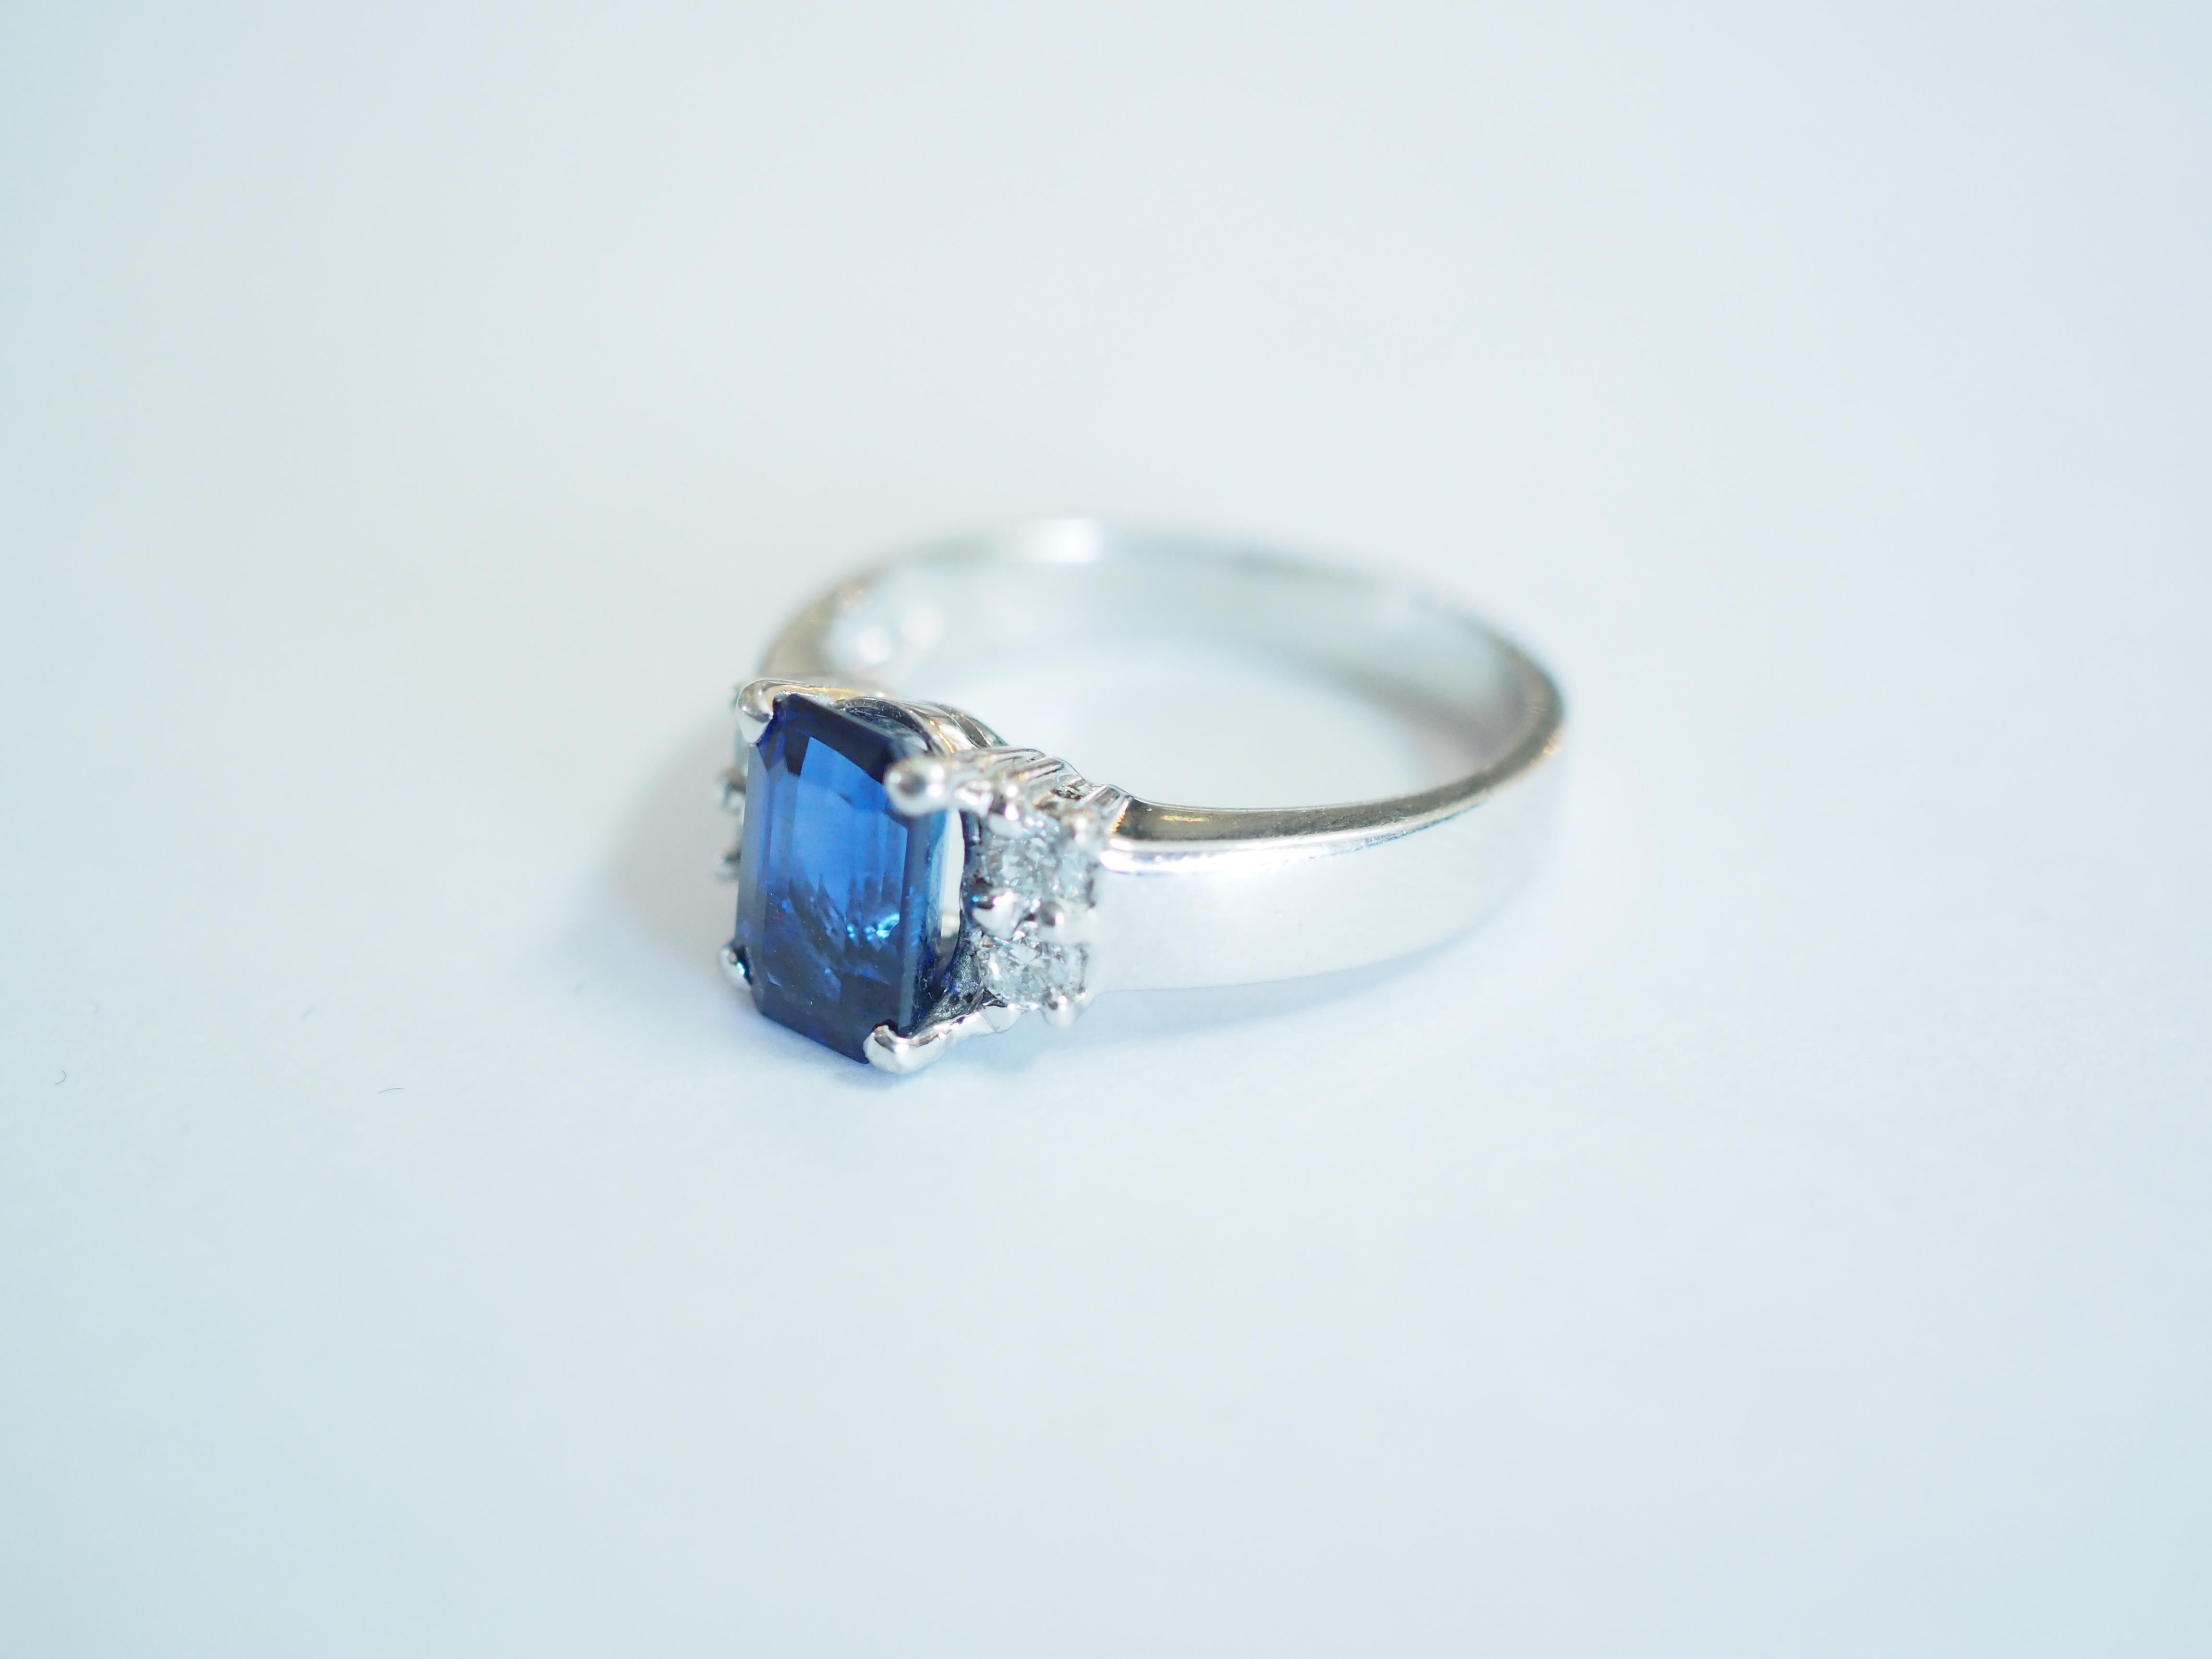 18k White Gold 2.03ct Emerald Cut Royal Blue Sapphire & Diamond Engagement Ring In New Condition For Sale In เกาะสมุย, TH